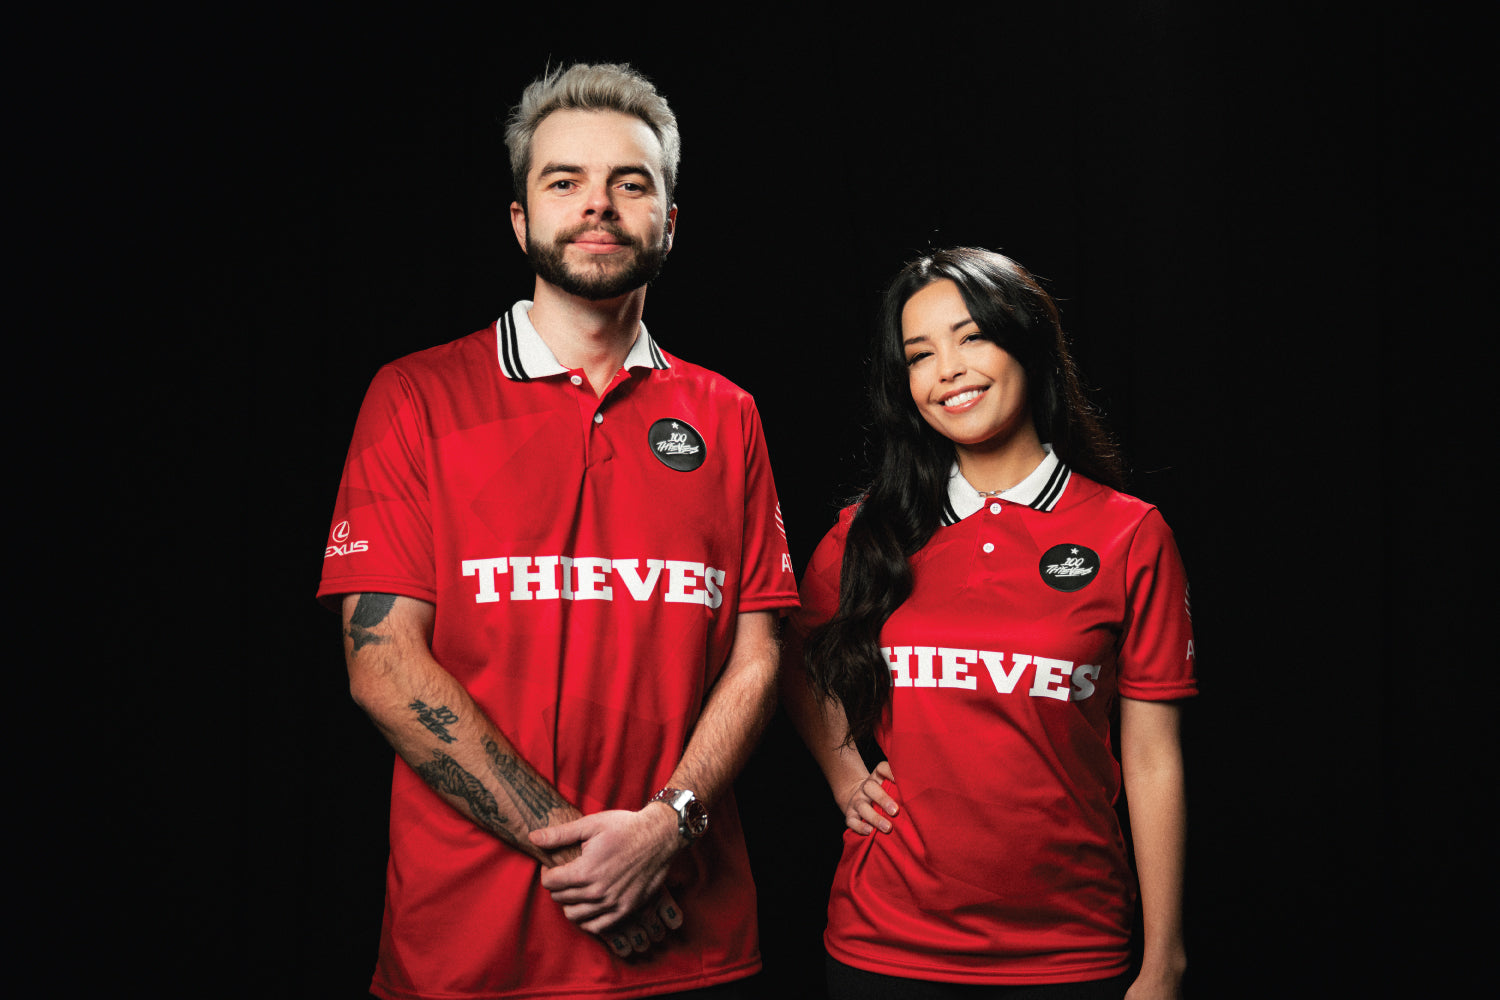 100 Thieves  The Loadout